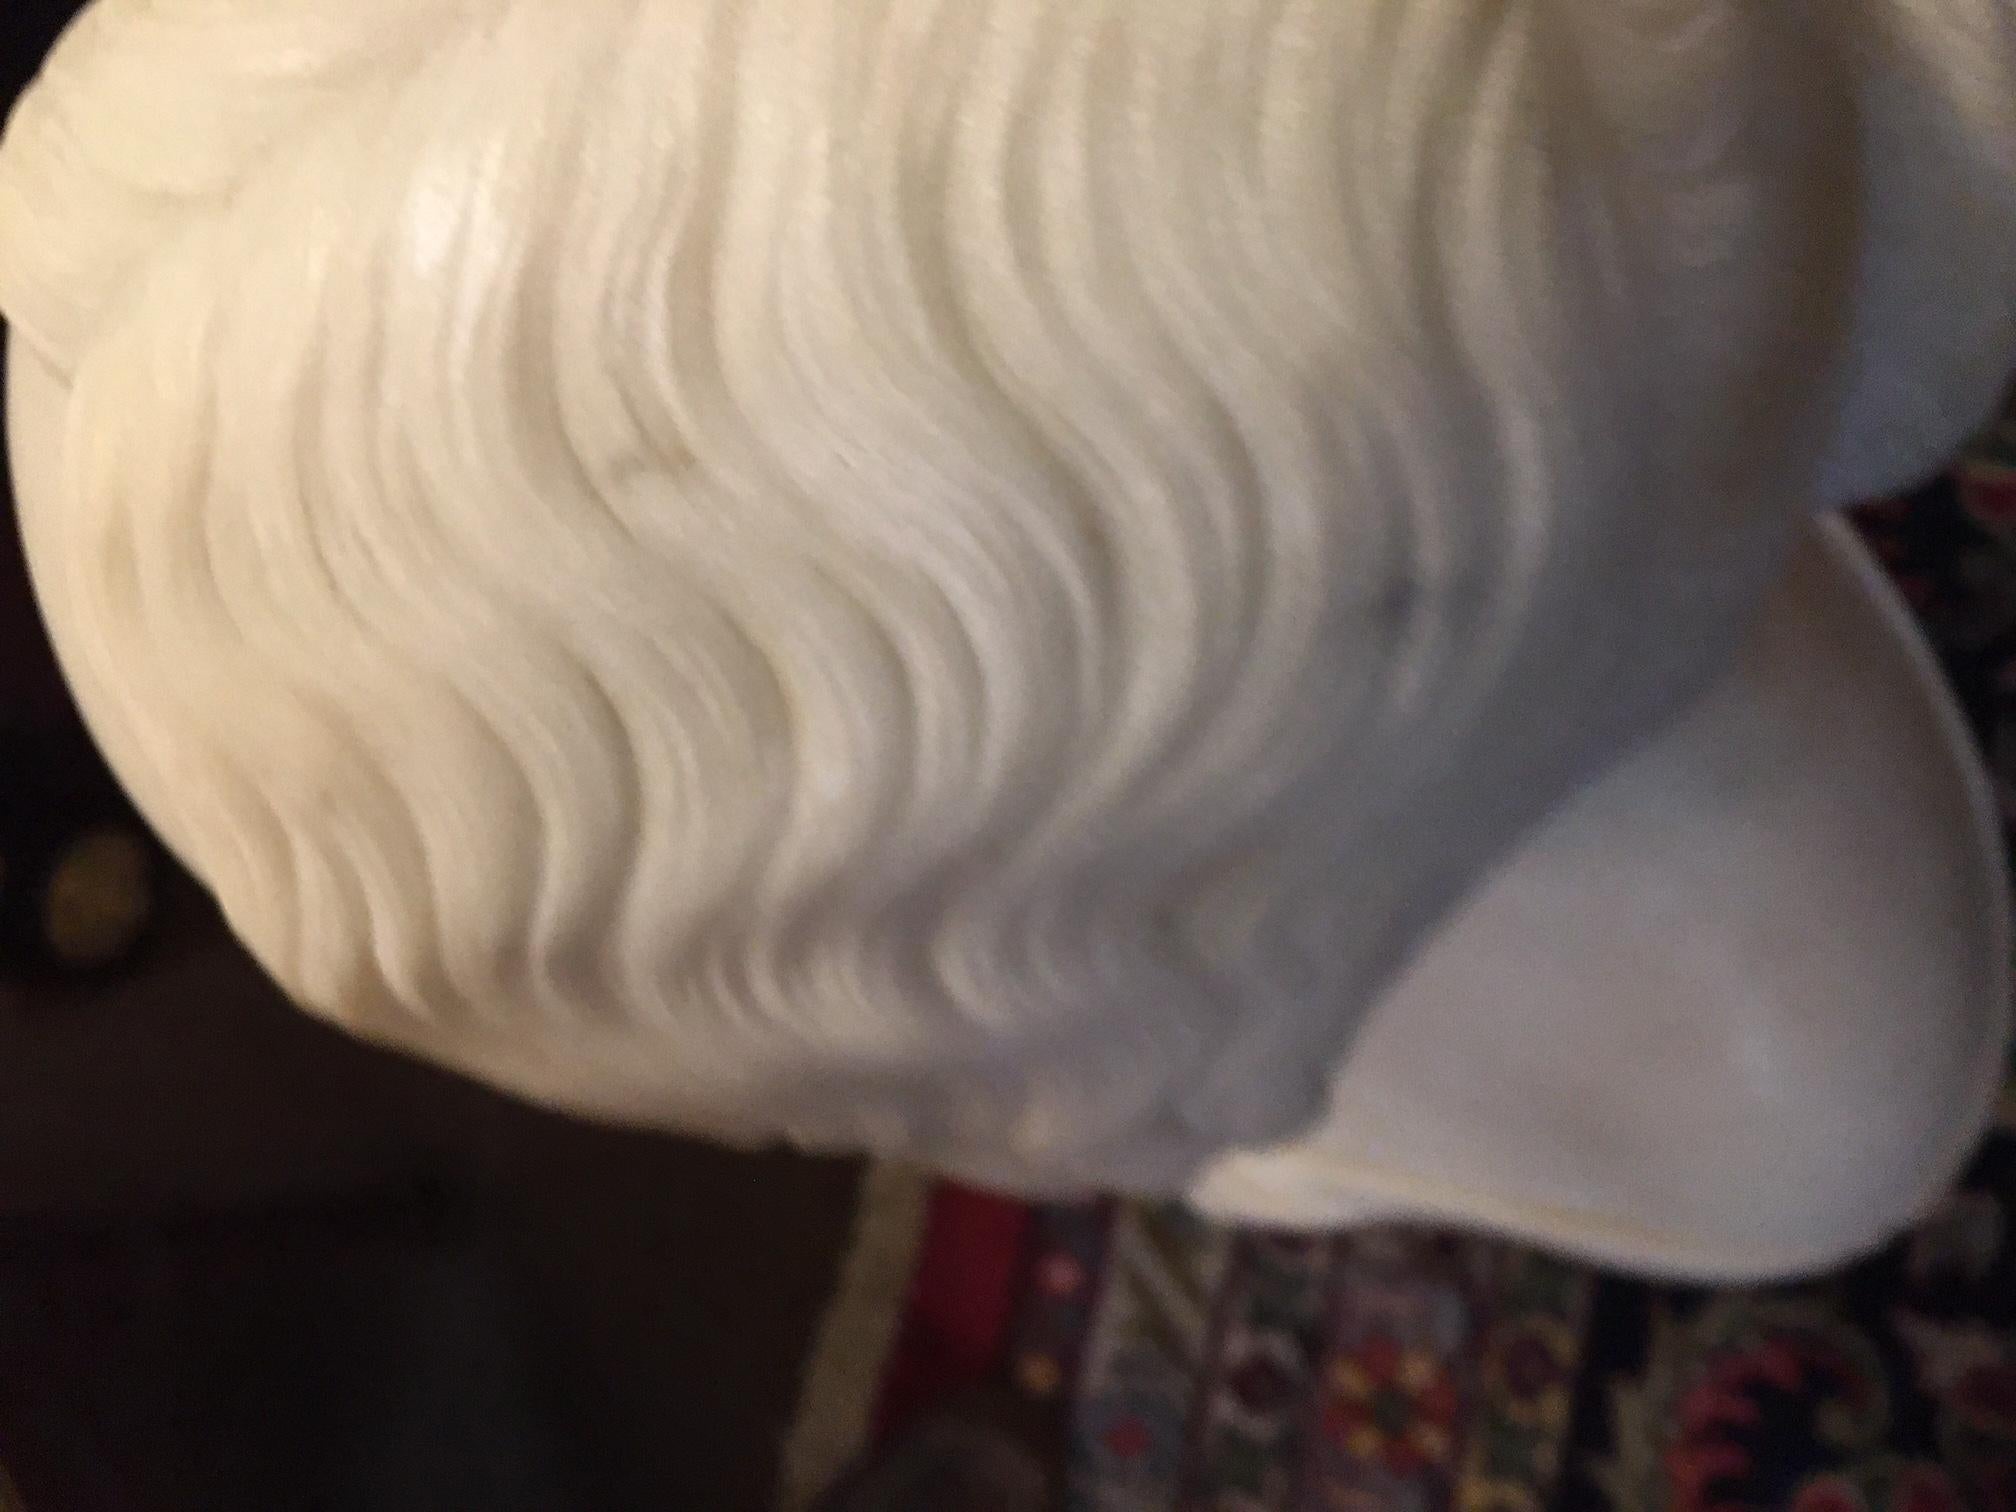 Carrara Marble Italian Neoclassic Marble Bust of Woman signed Lawrence Macdonald Rome 1852 For Sale